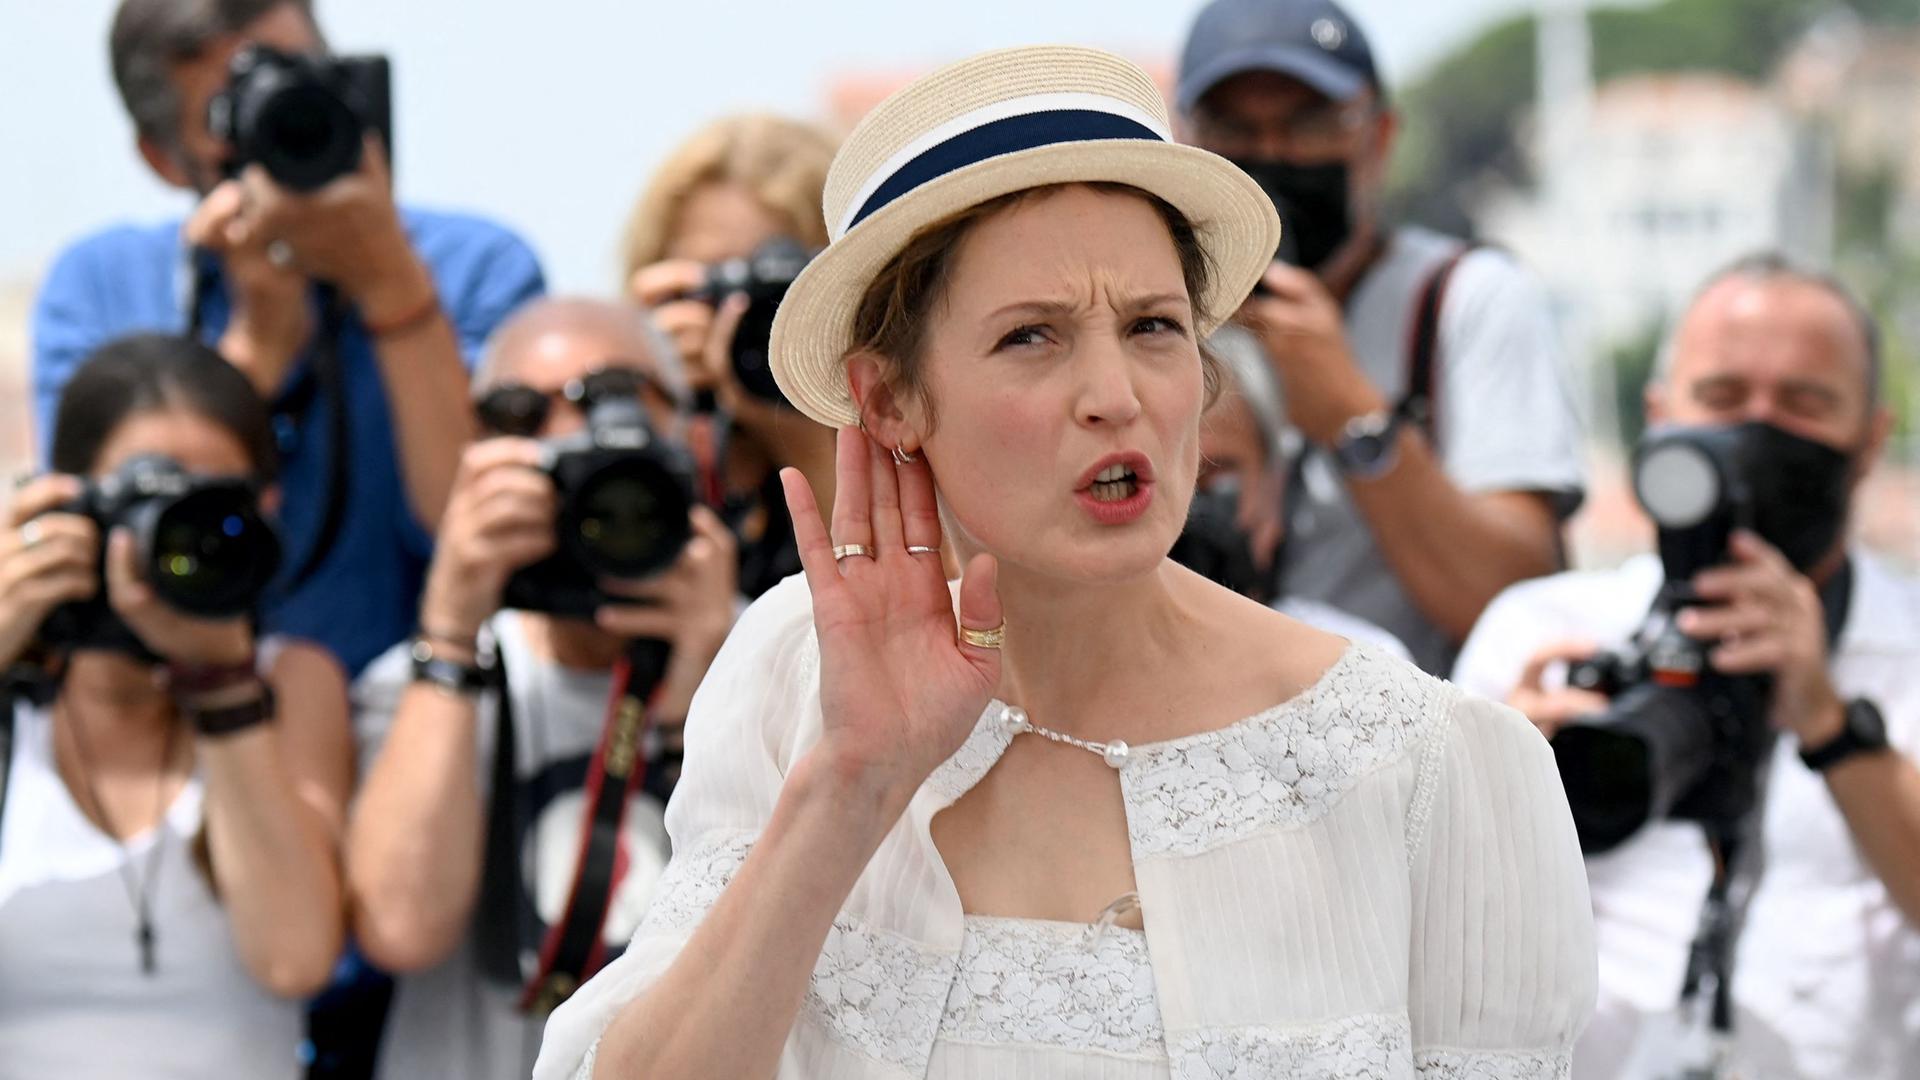 Luxembourg actress Vicky Krieps poses during a photocall for the film "Bergman Island" at the 74th edition of the Cannes Film Festival in Cannes, southern France, on July 12, 2021. (Photo by CHRISTOPHE SIMON / AFP)